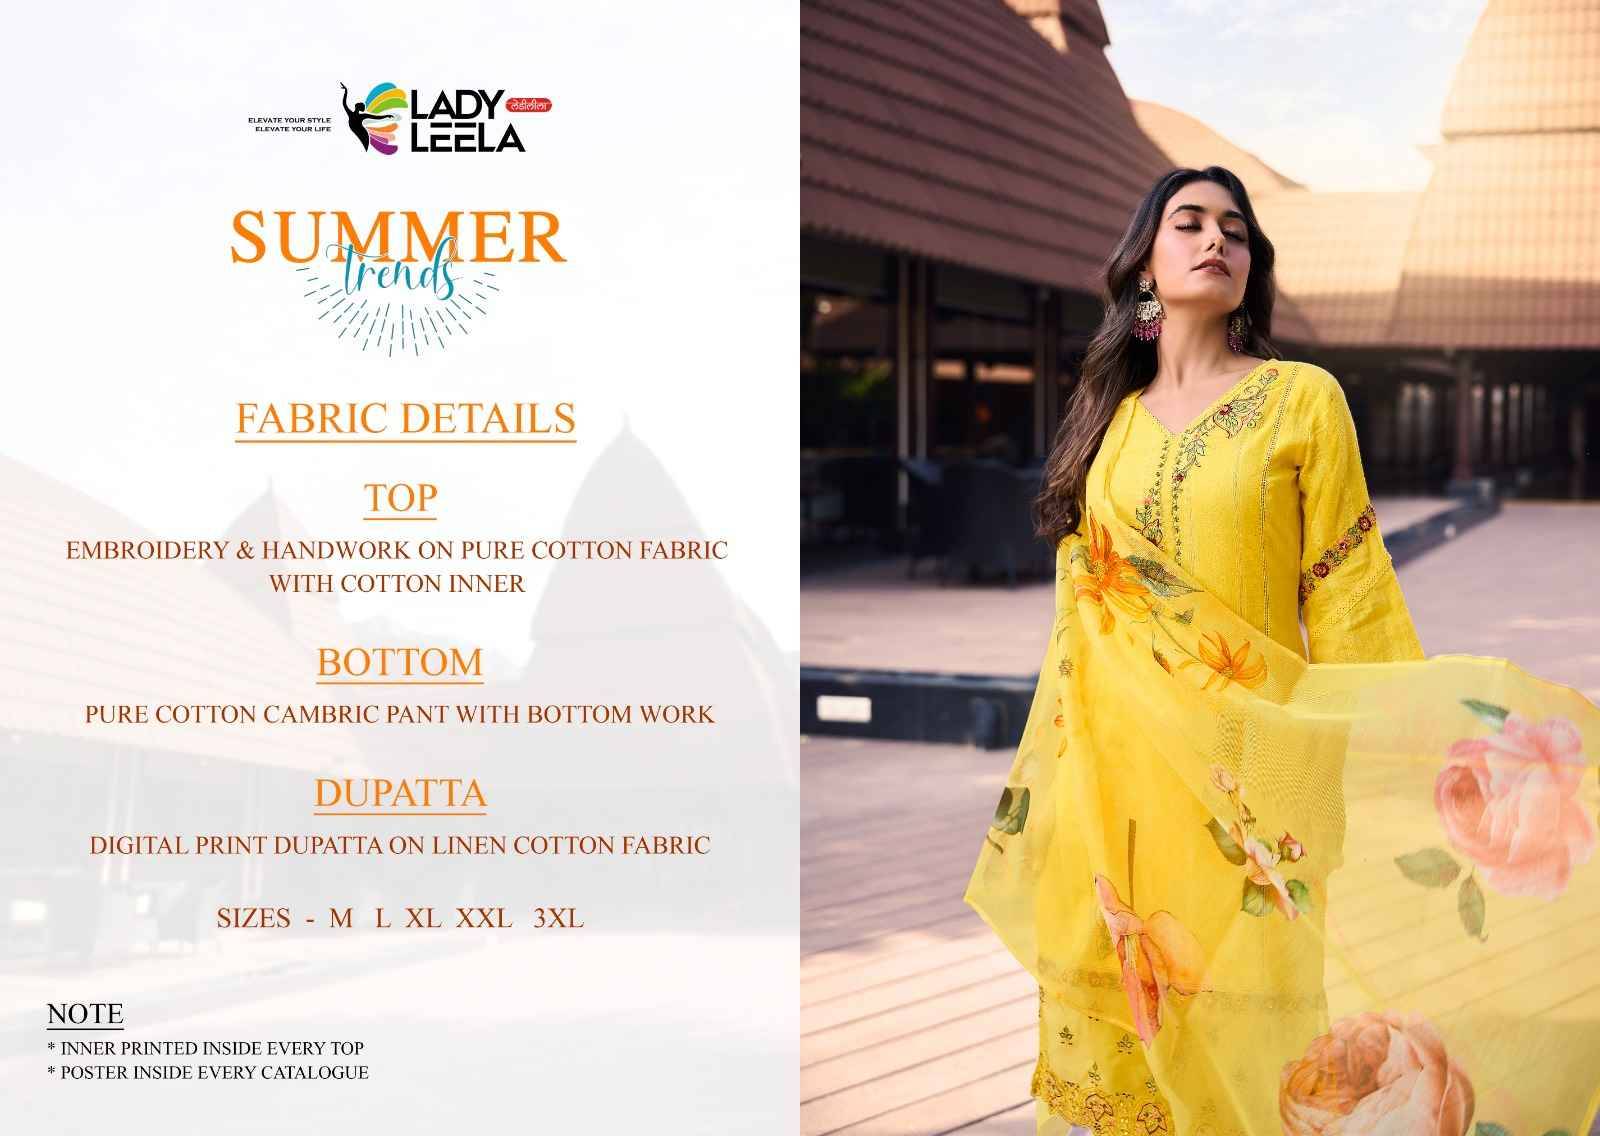 Summer Trends By Lady Leela 1261 To 1266 Series Beautiful Festive Suits Colorful Stylish Fancy Casual Wear & Ethnic Wear Pure Cotton With Work Dresses At Wholesale Price